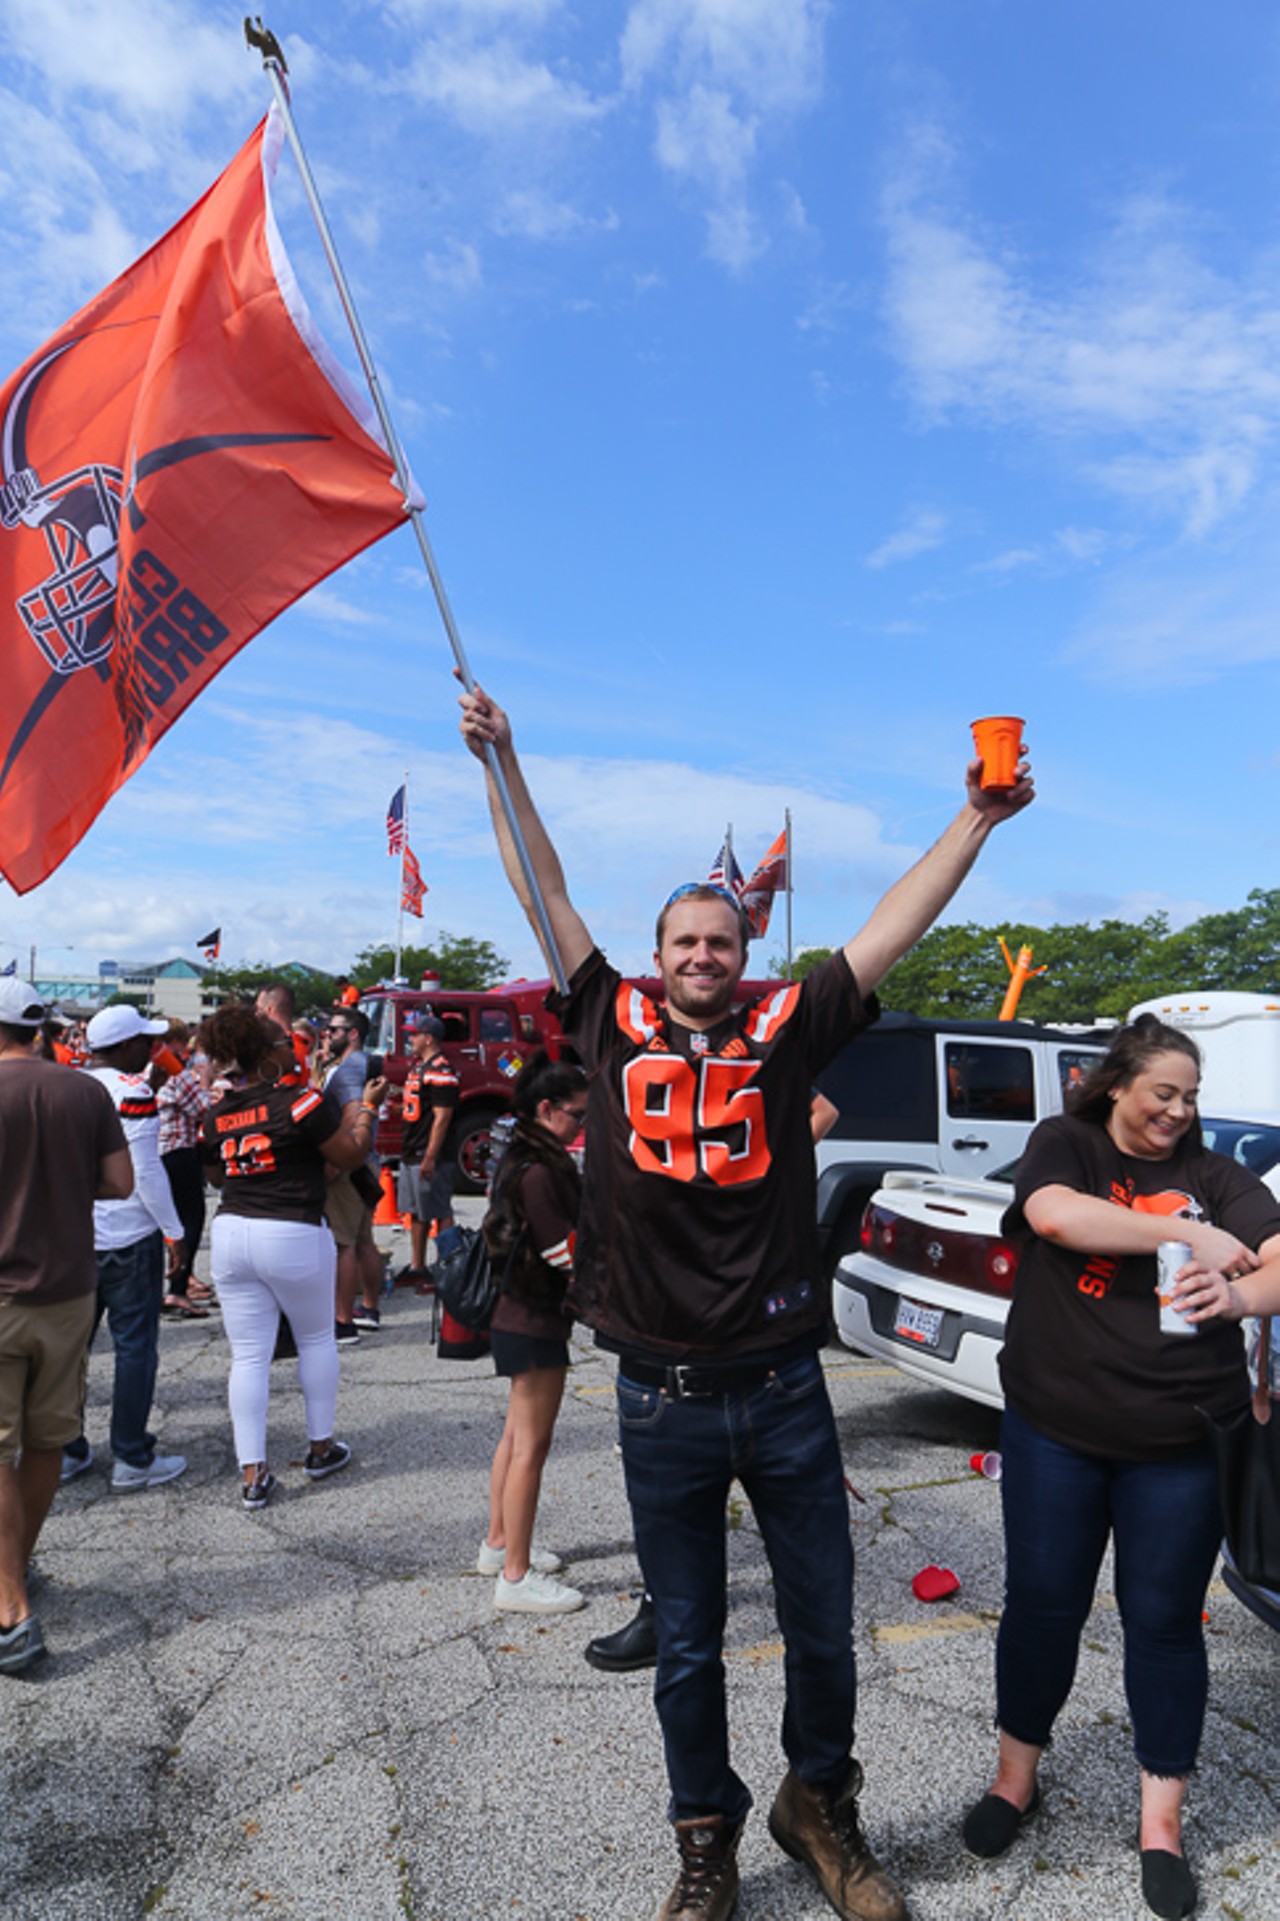 Everything We Saw in the Muni Lot Before the 2019 Browns Opener